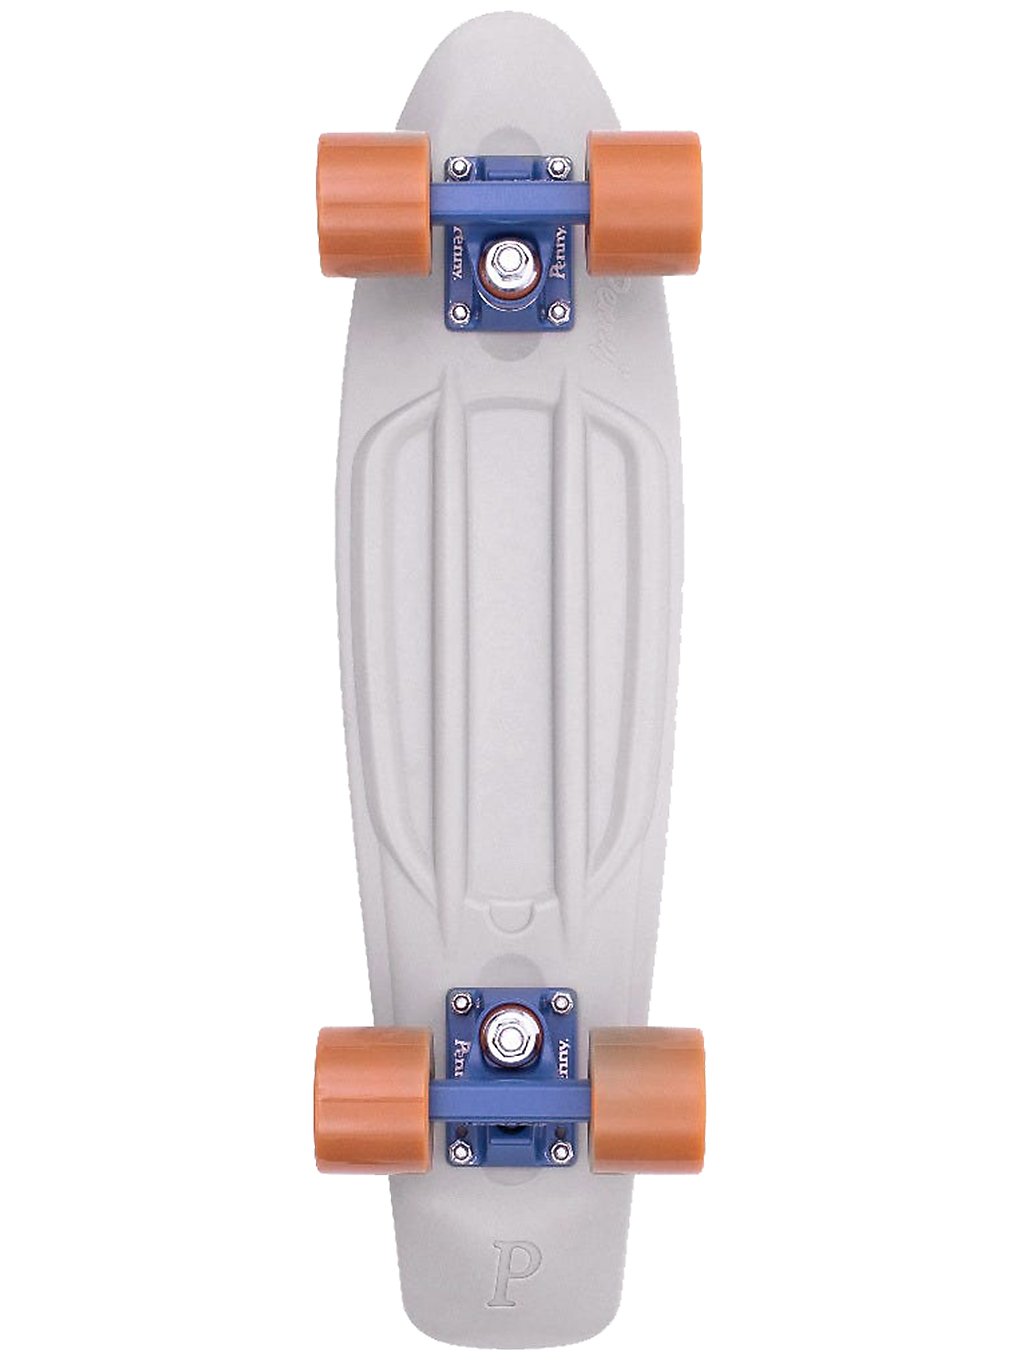 Penny Skateboards Stone 22 Complete forest grey